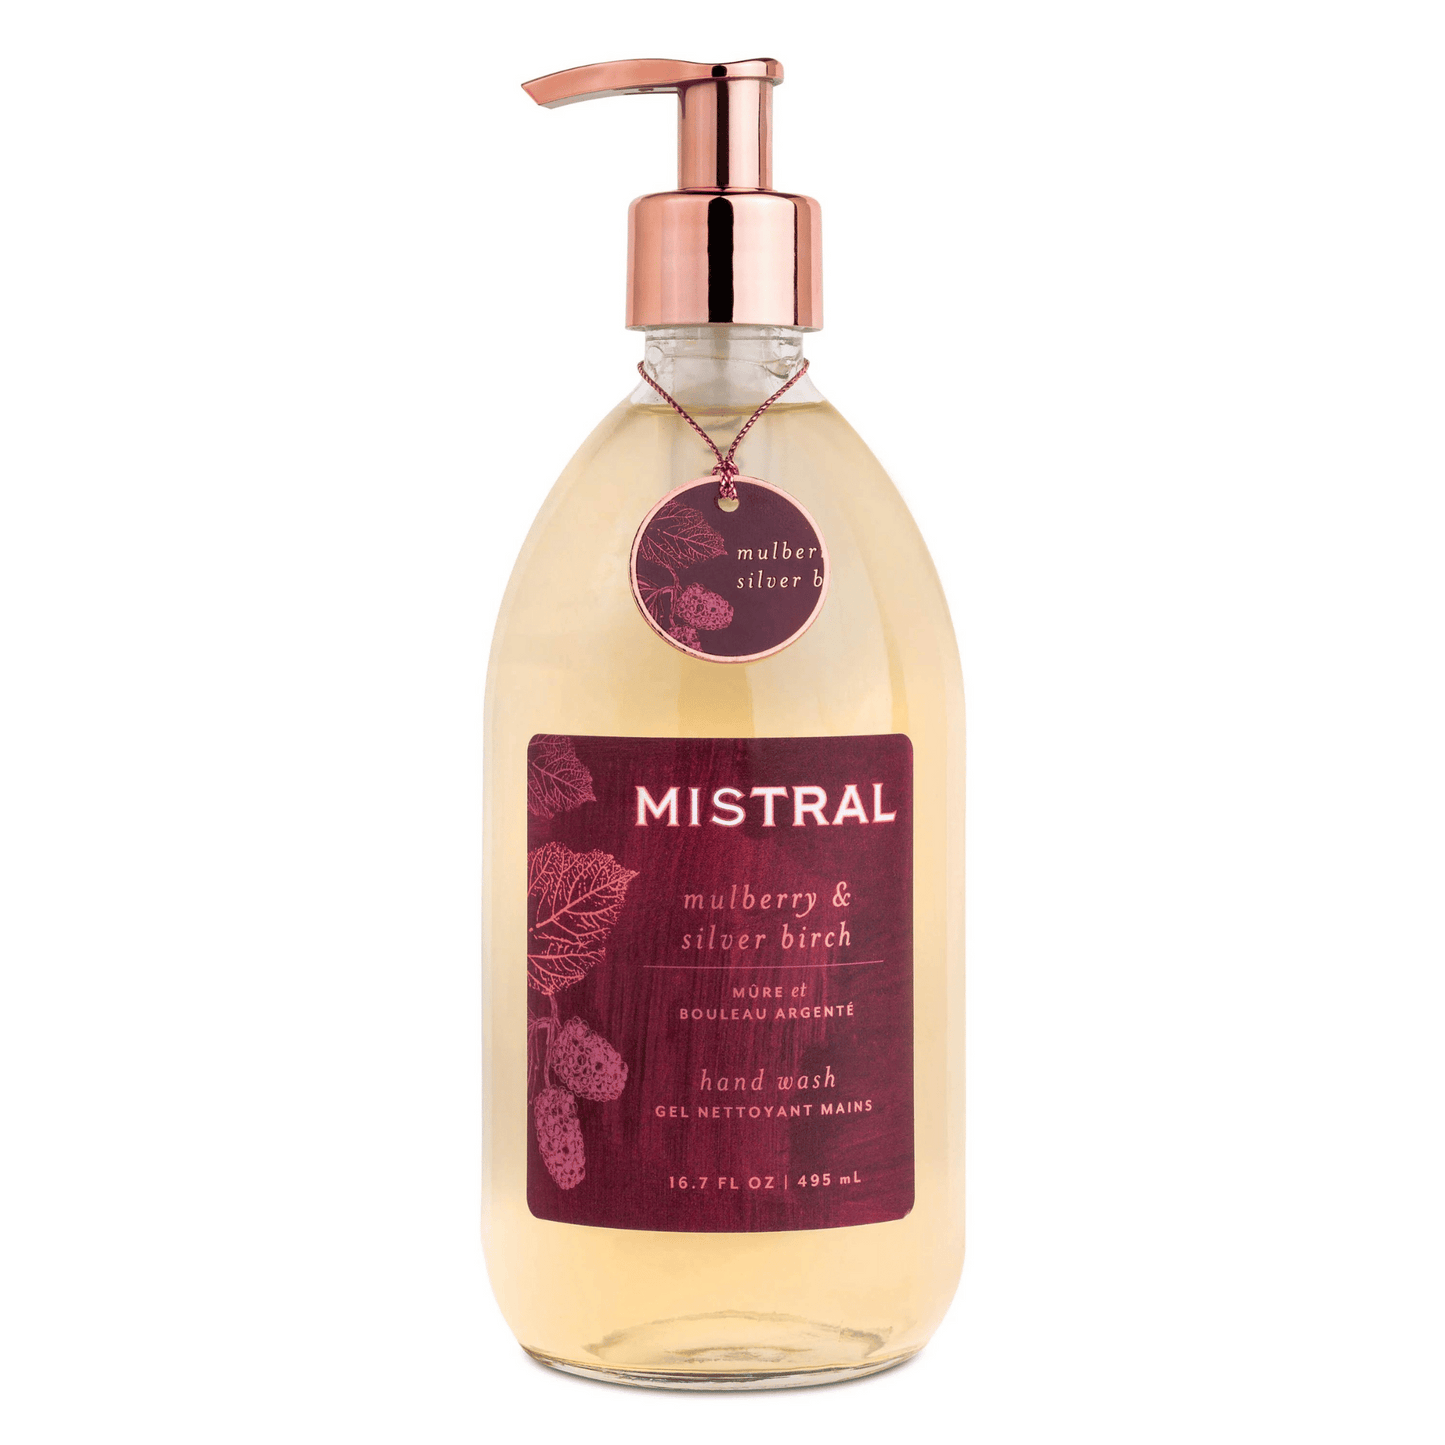 Primary Image of Mulberry and Silver Birch Hand Wash